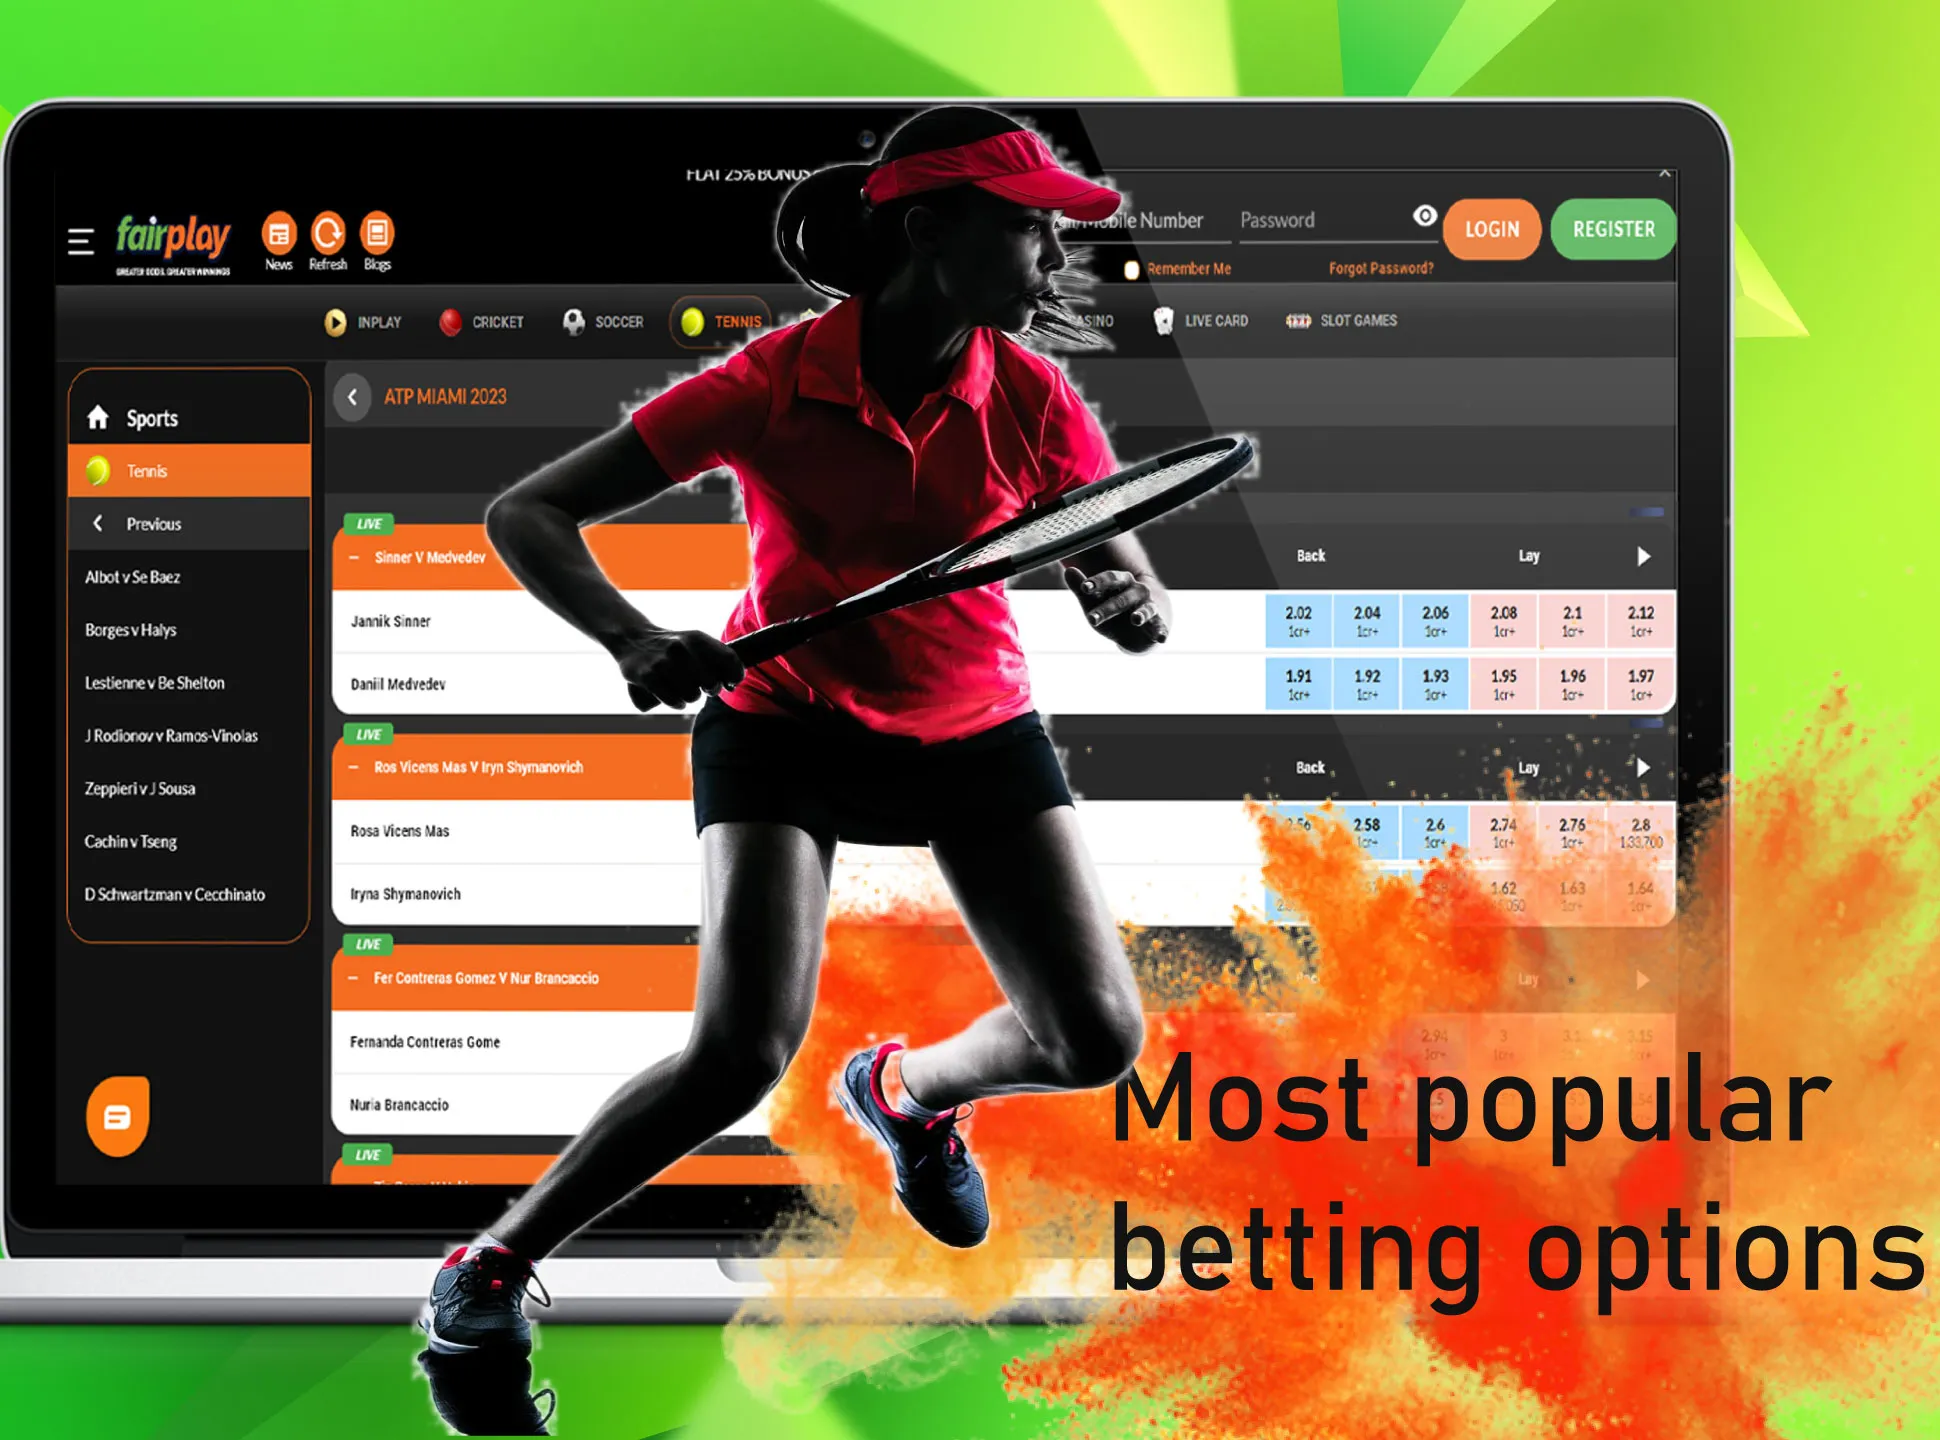 These are the most popular betting options on tennis on the Fairplay site and in the app.